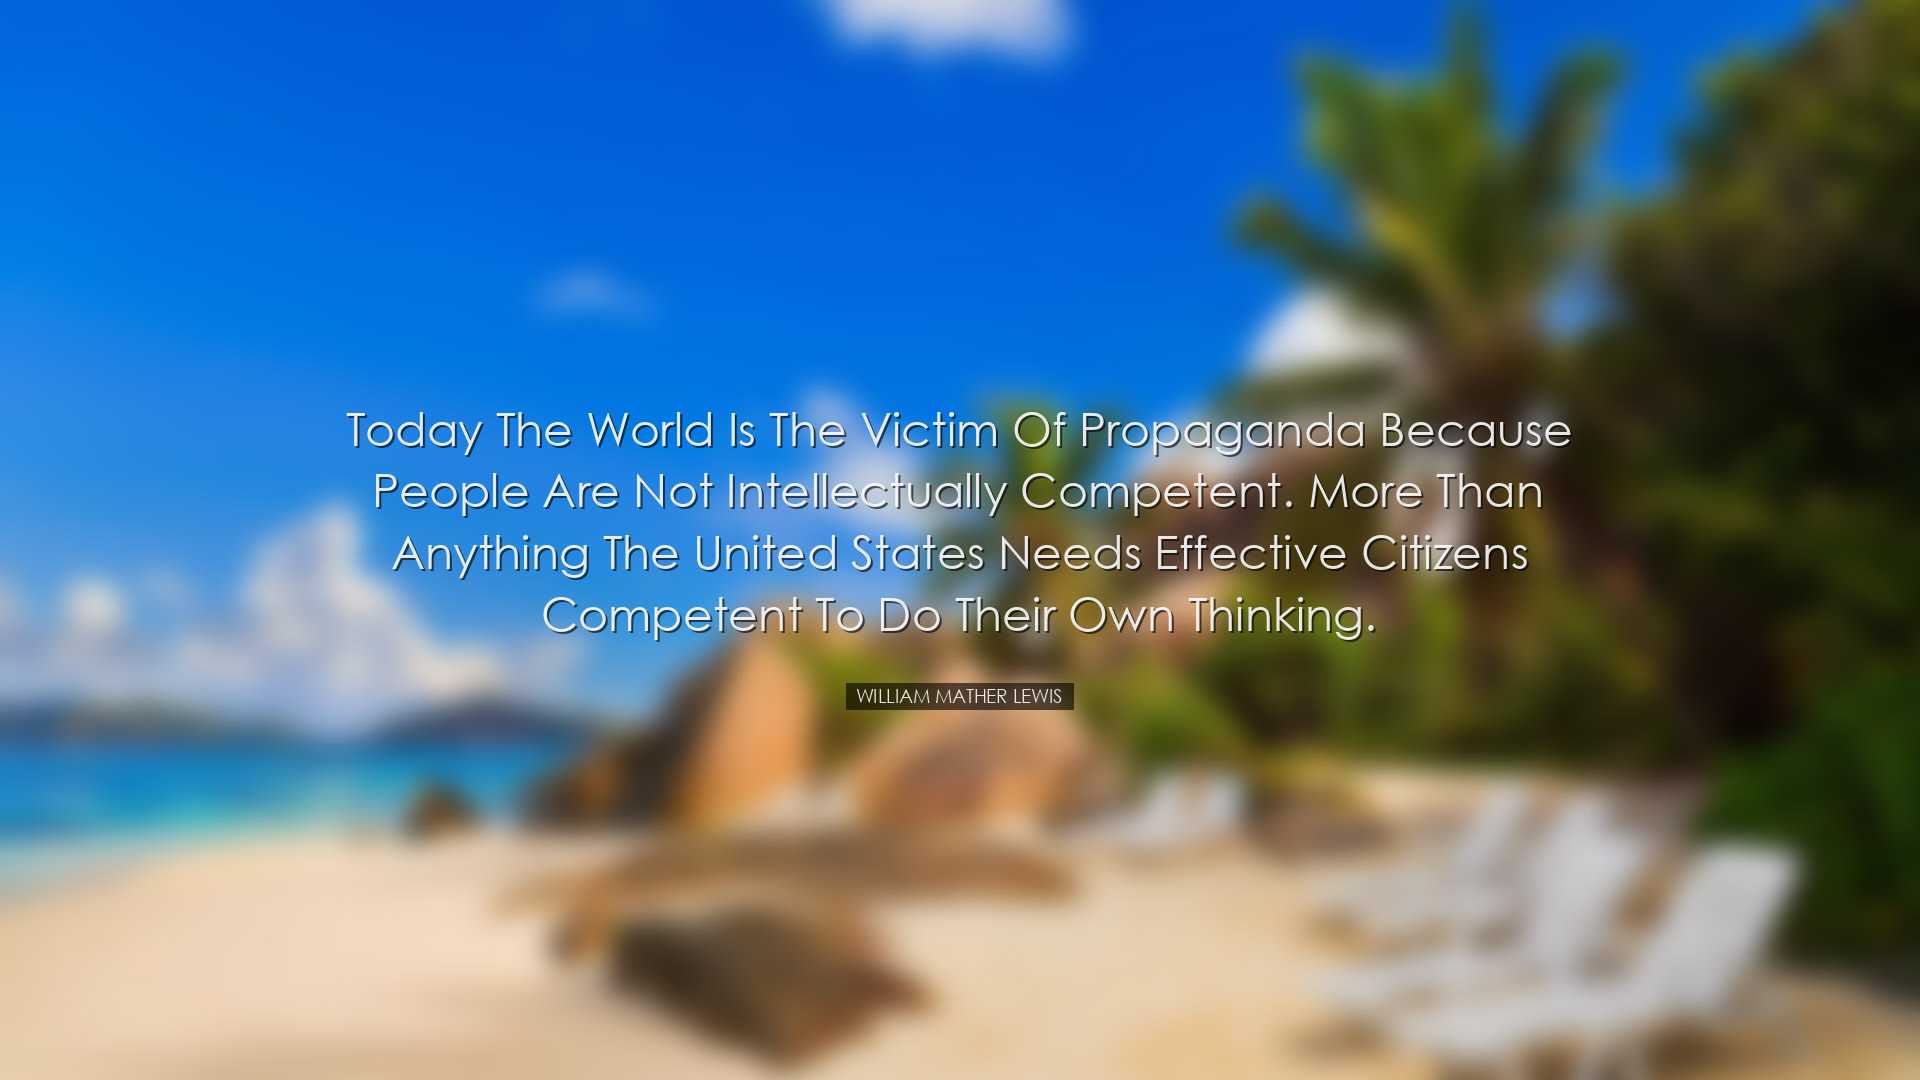 Today the world is the victim of propaganda because people are not